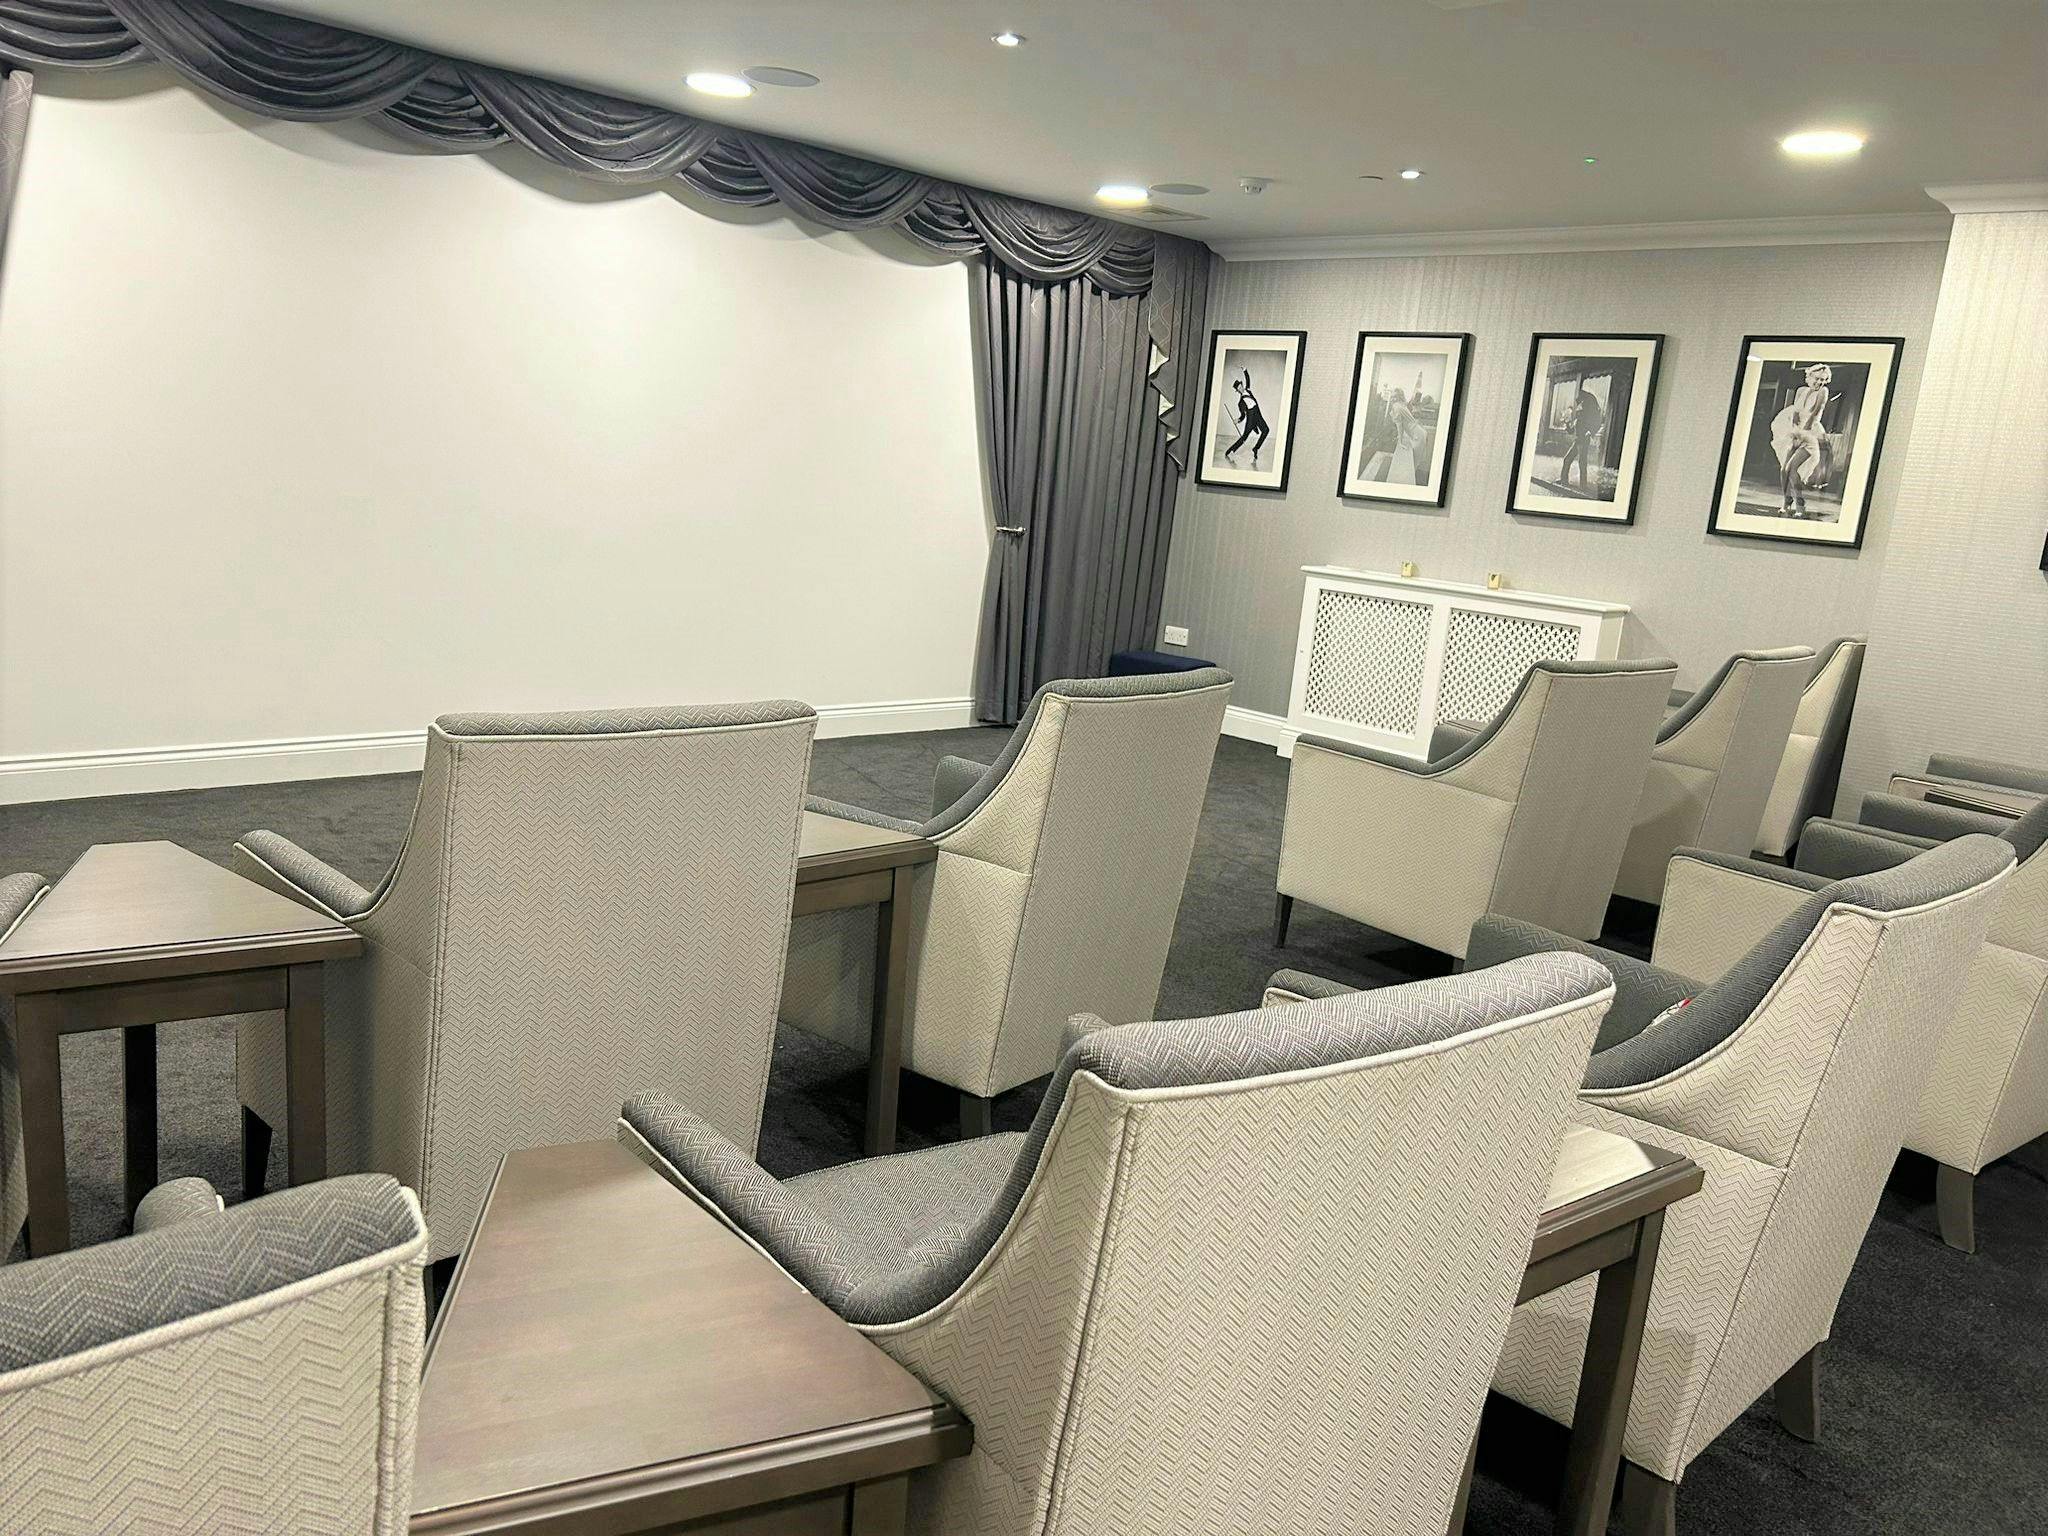 Cinema of Cuffley Manor care home in Potters Bar, Hertfordshire